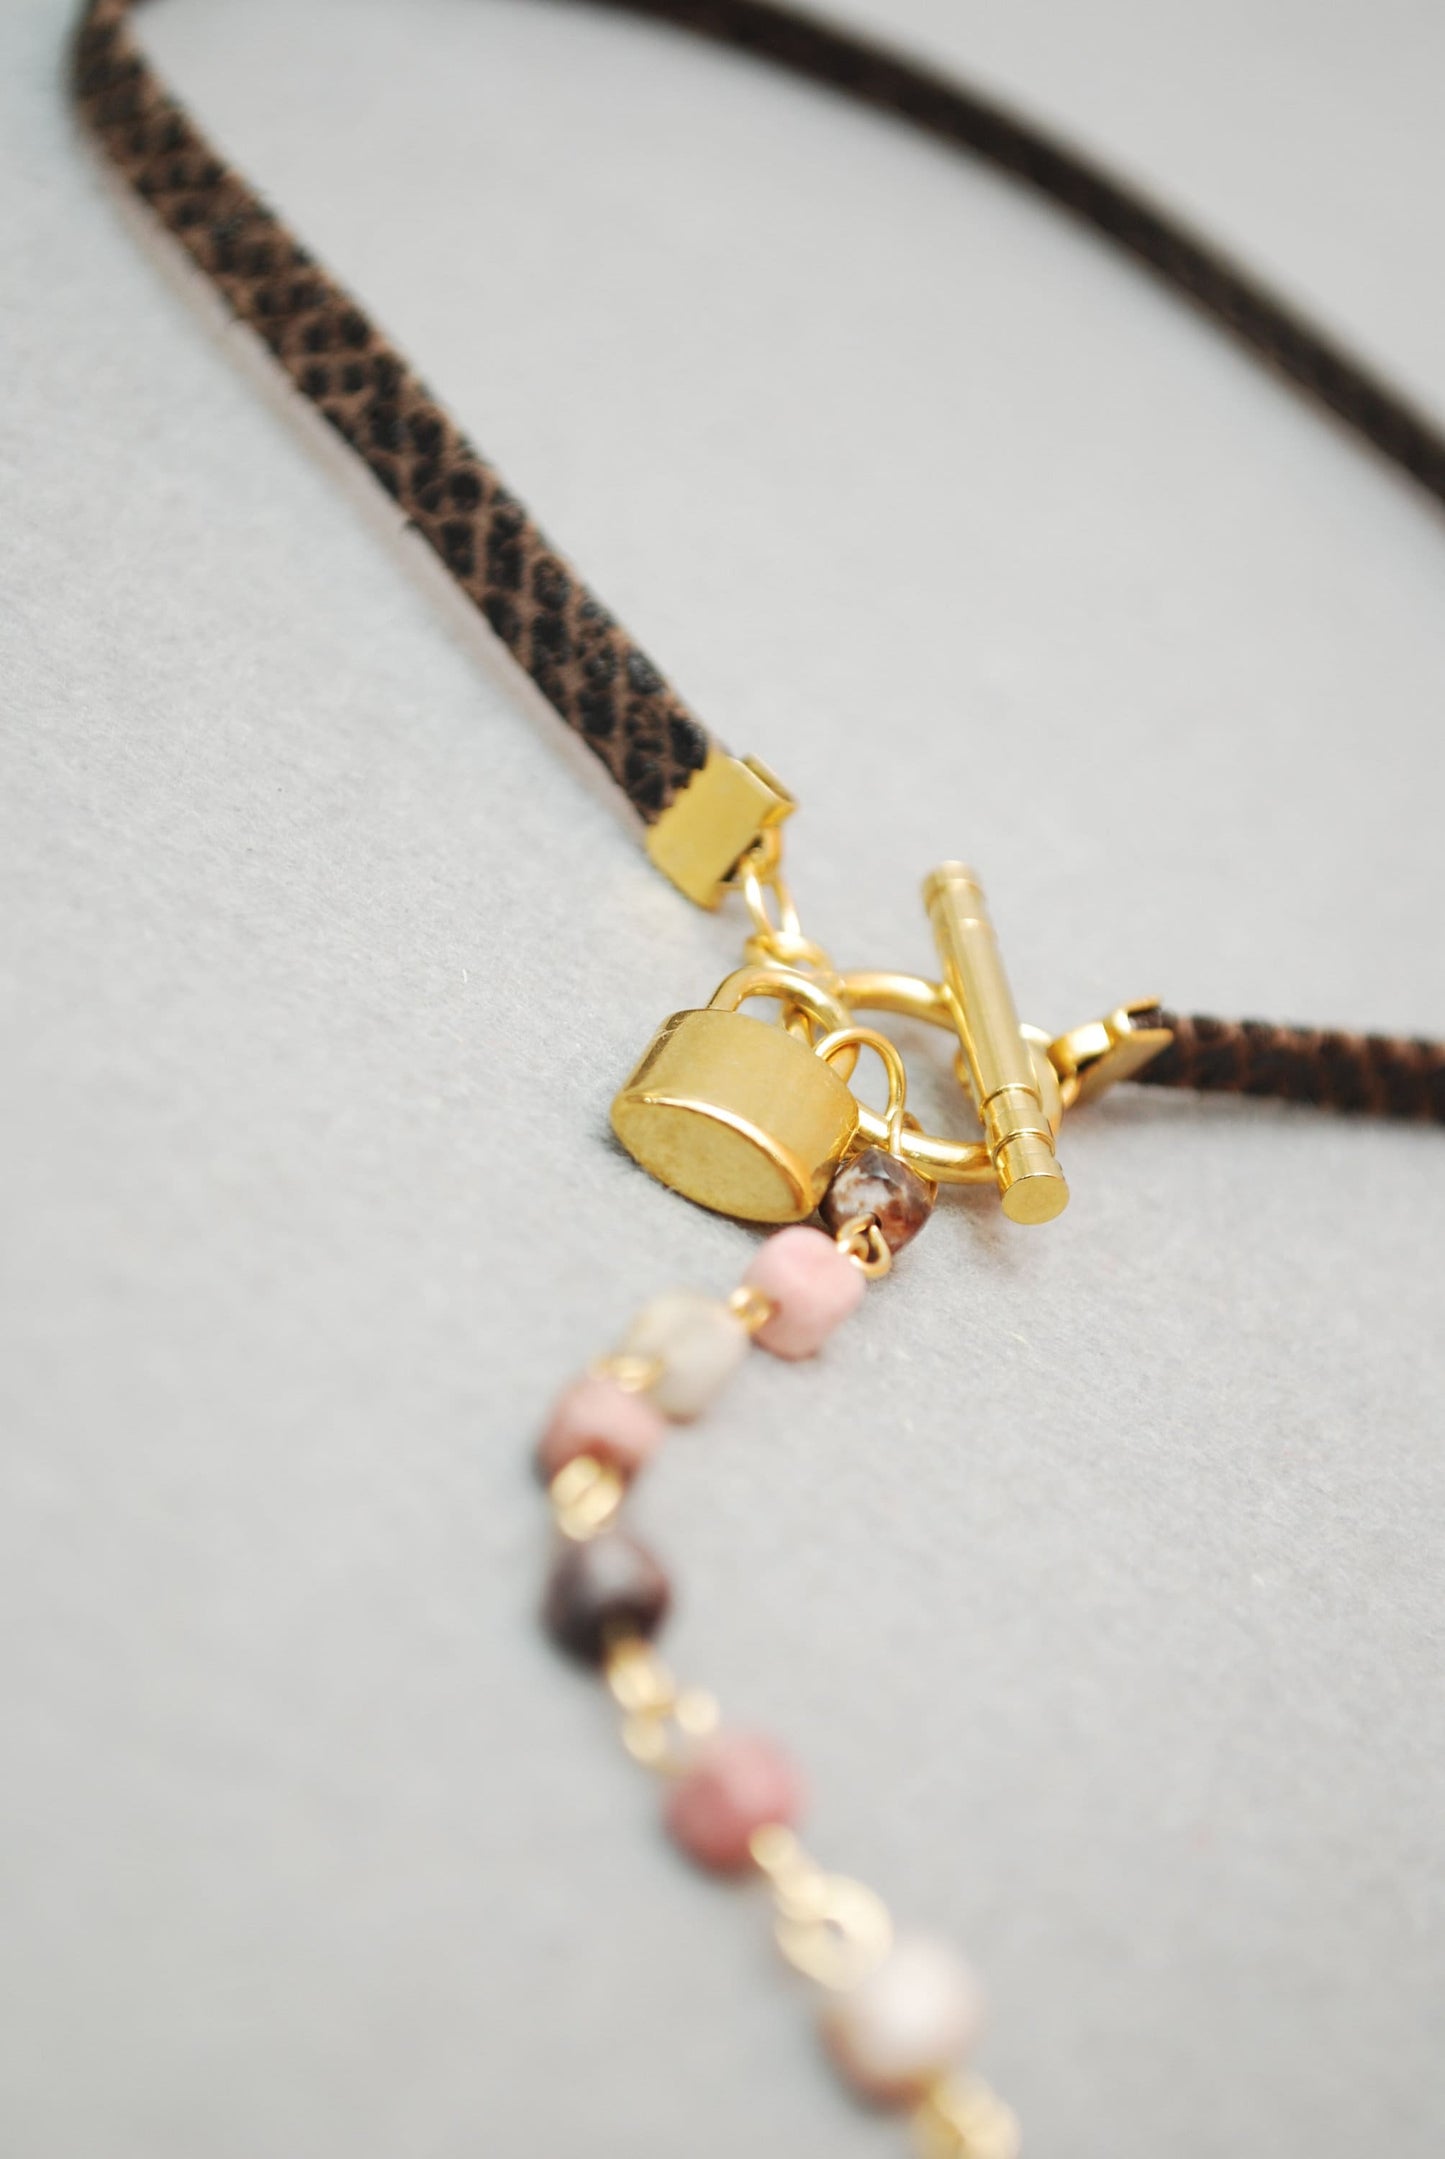 Lizart Brown Leather Choker with Rhodochrosite Stone Accent - Unique, Elegant, and Sensual Statement Piece for Fashion-forward Individuals